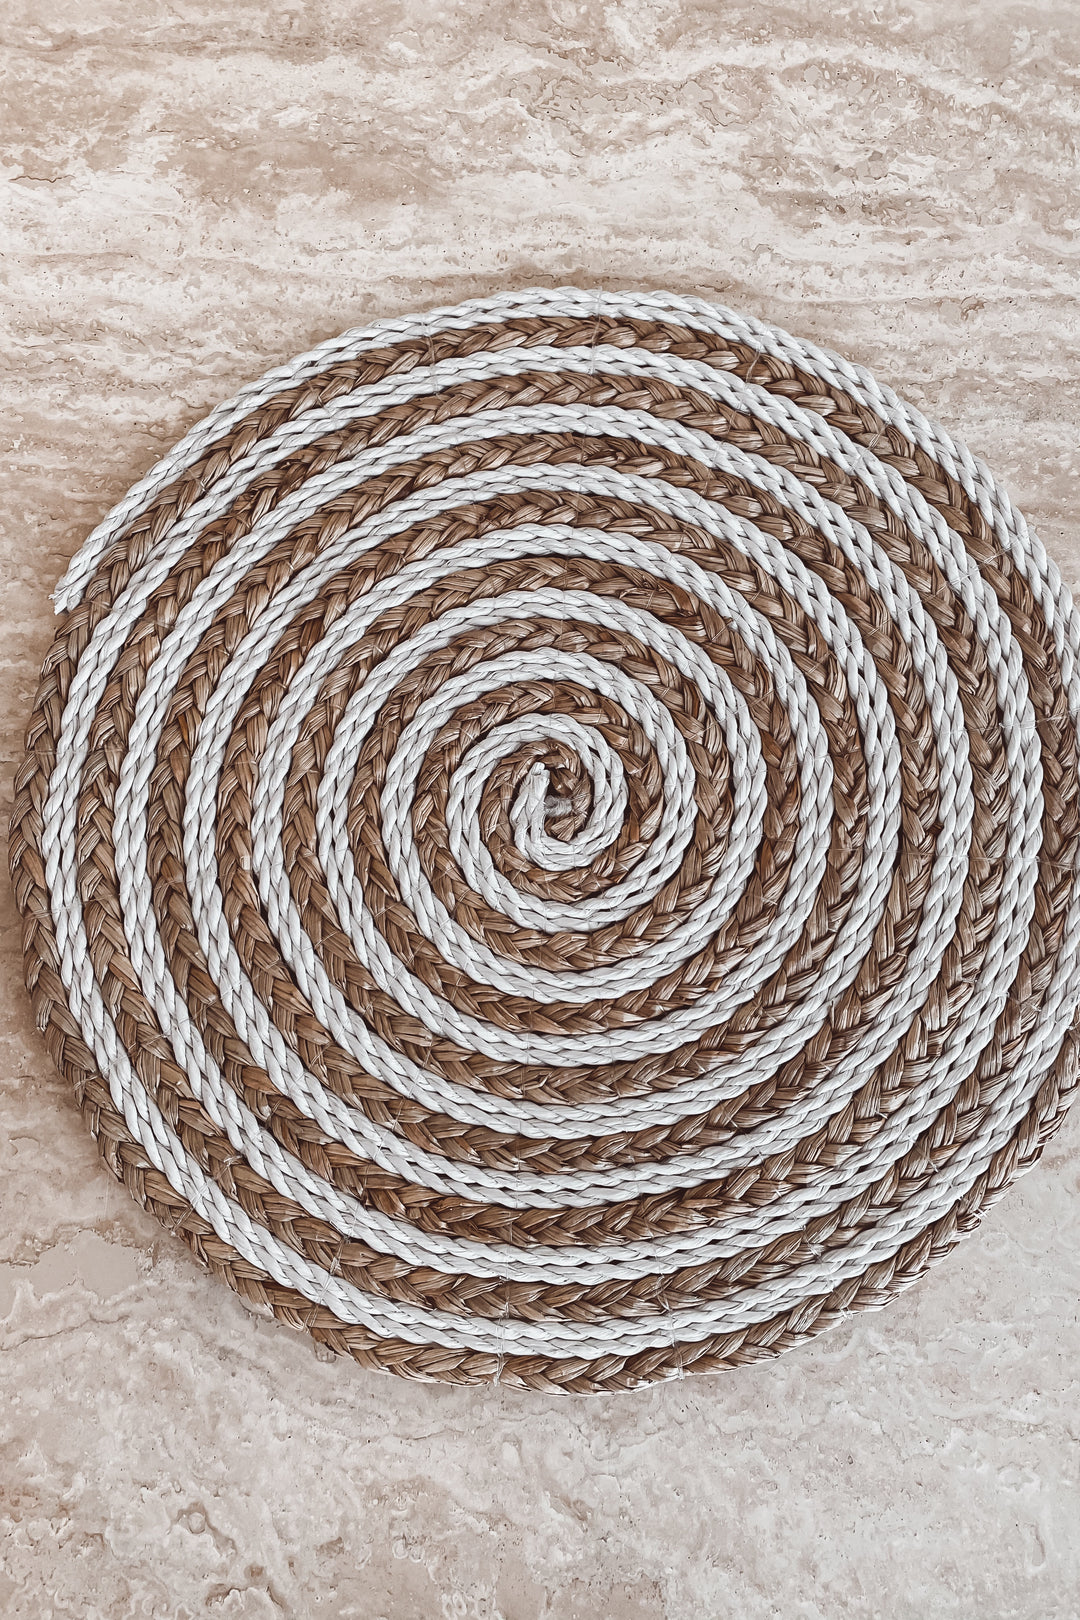 Woven Plate Charger